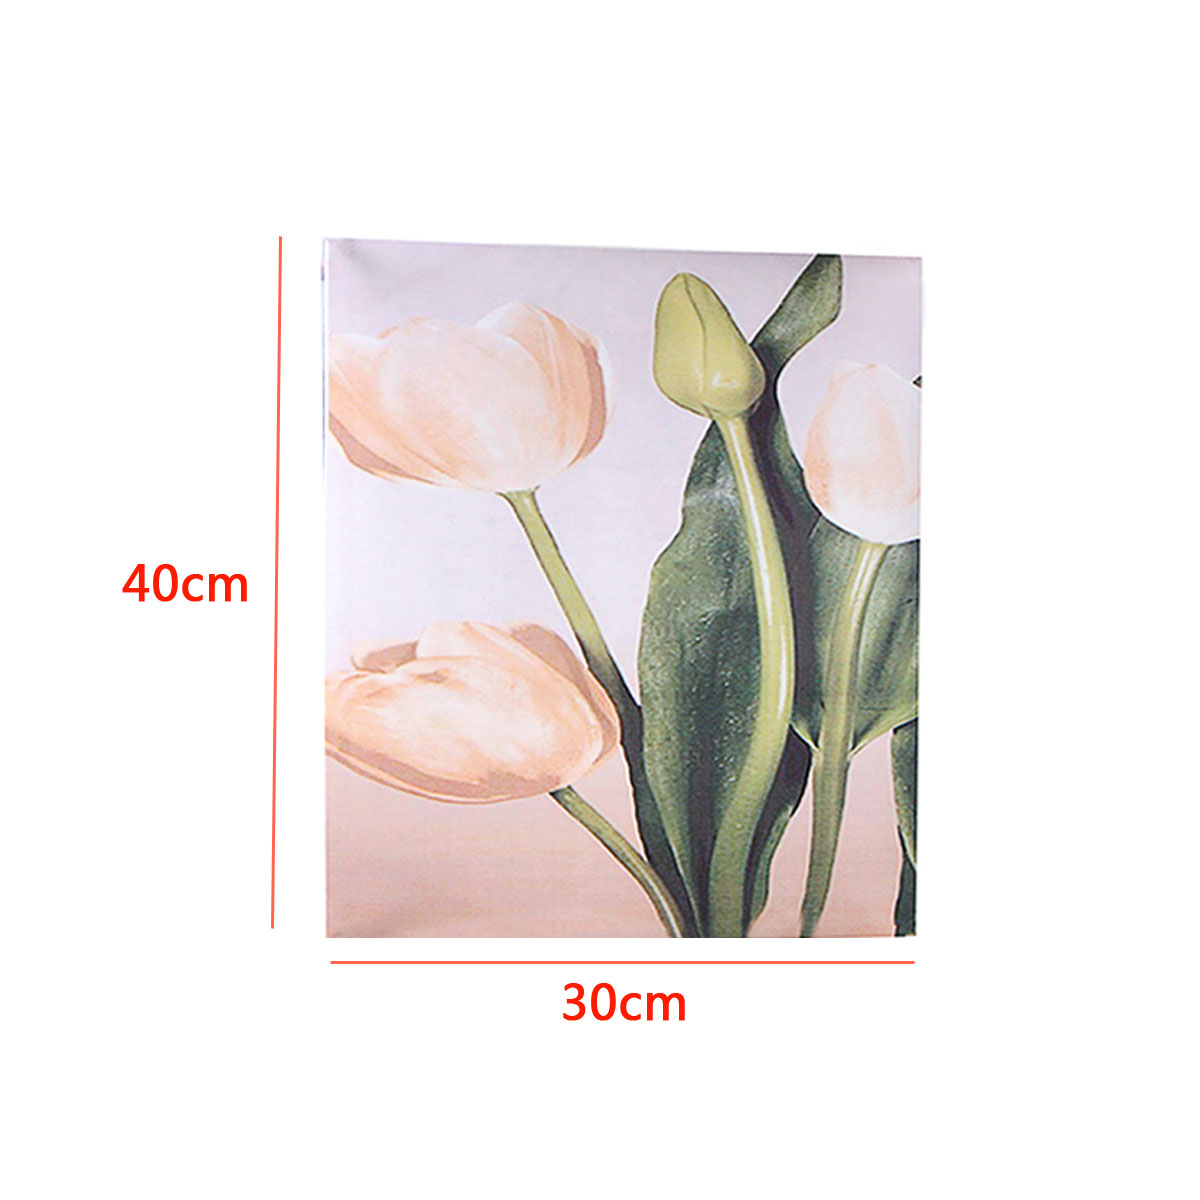 Wall-Unframed-Triptych-Flower-Tulip-Blossom-Canvas-Prints-Picture-Paintings-1639170